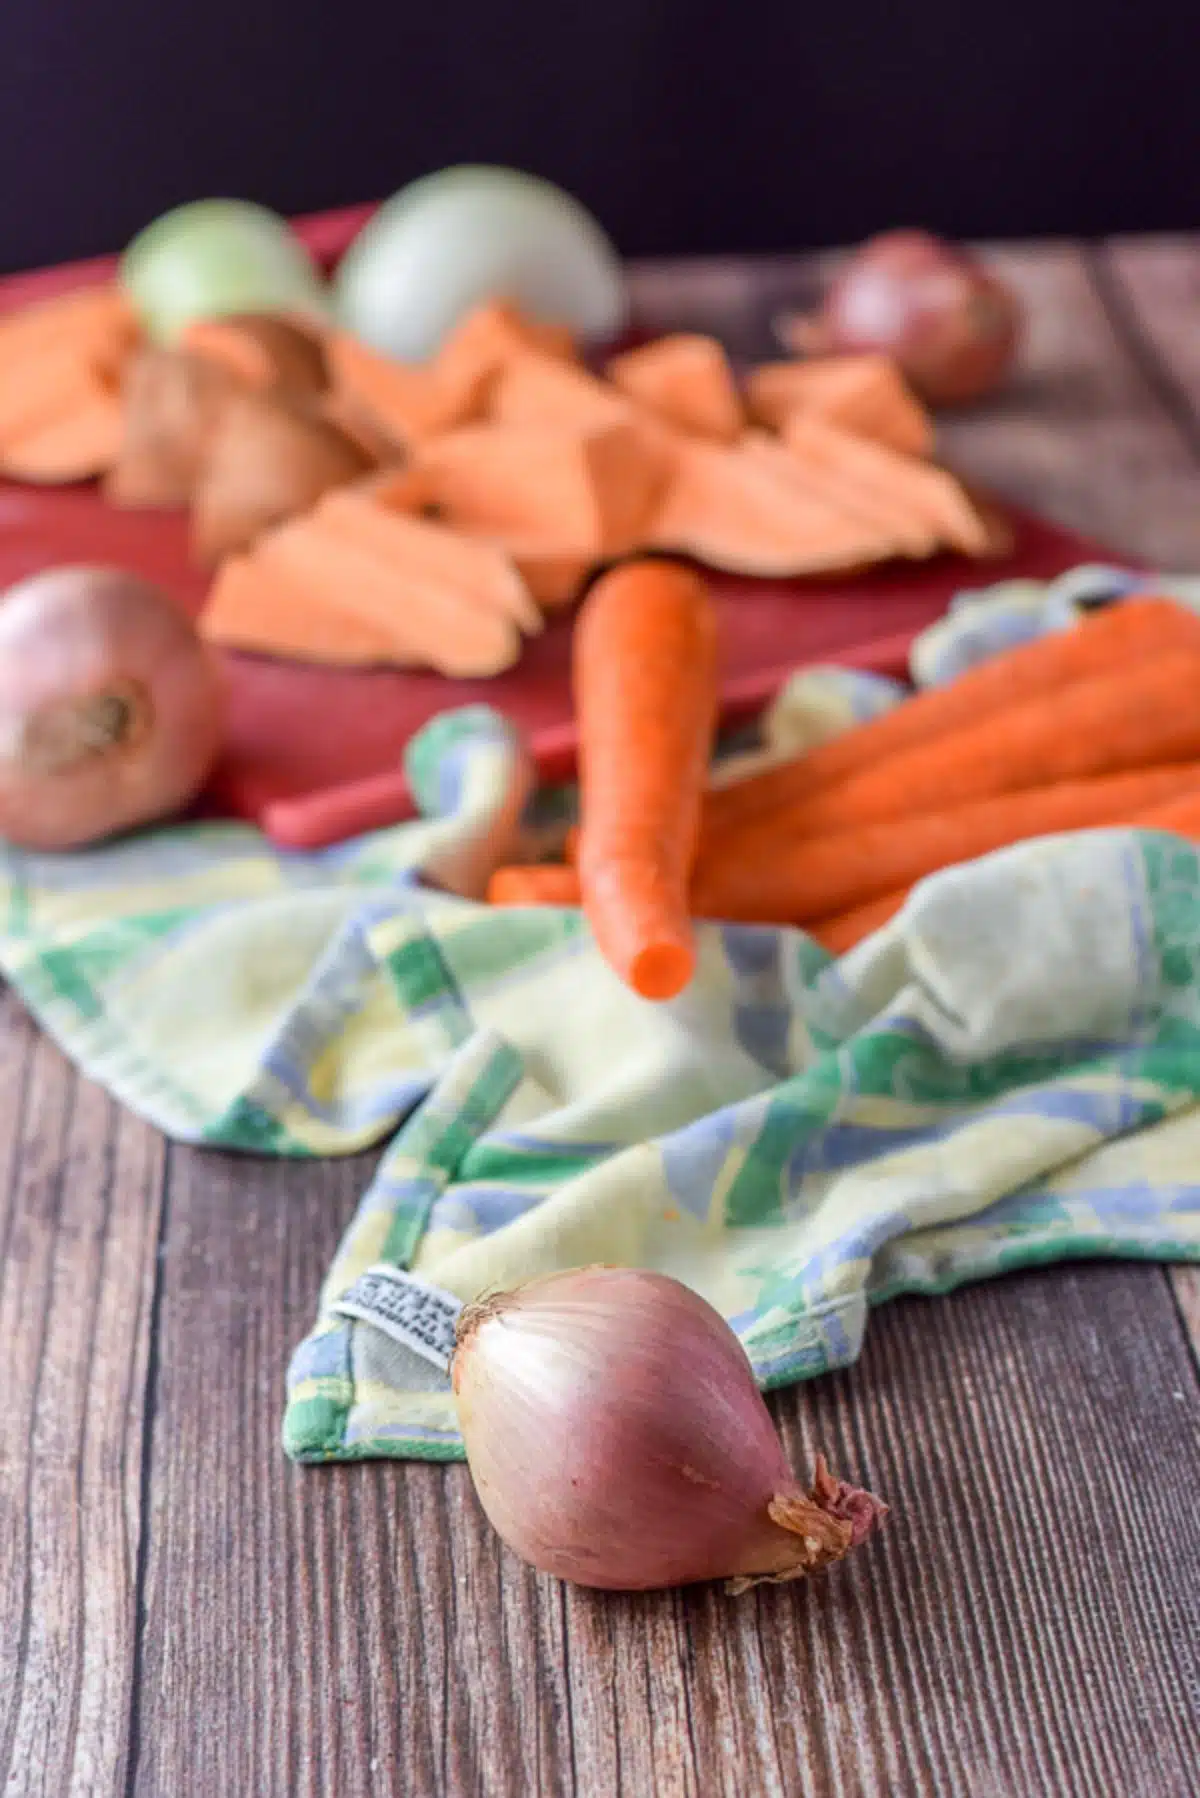 shallots, carrots, sweet potatoes and onions on a colorful towel and on a wooden table